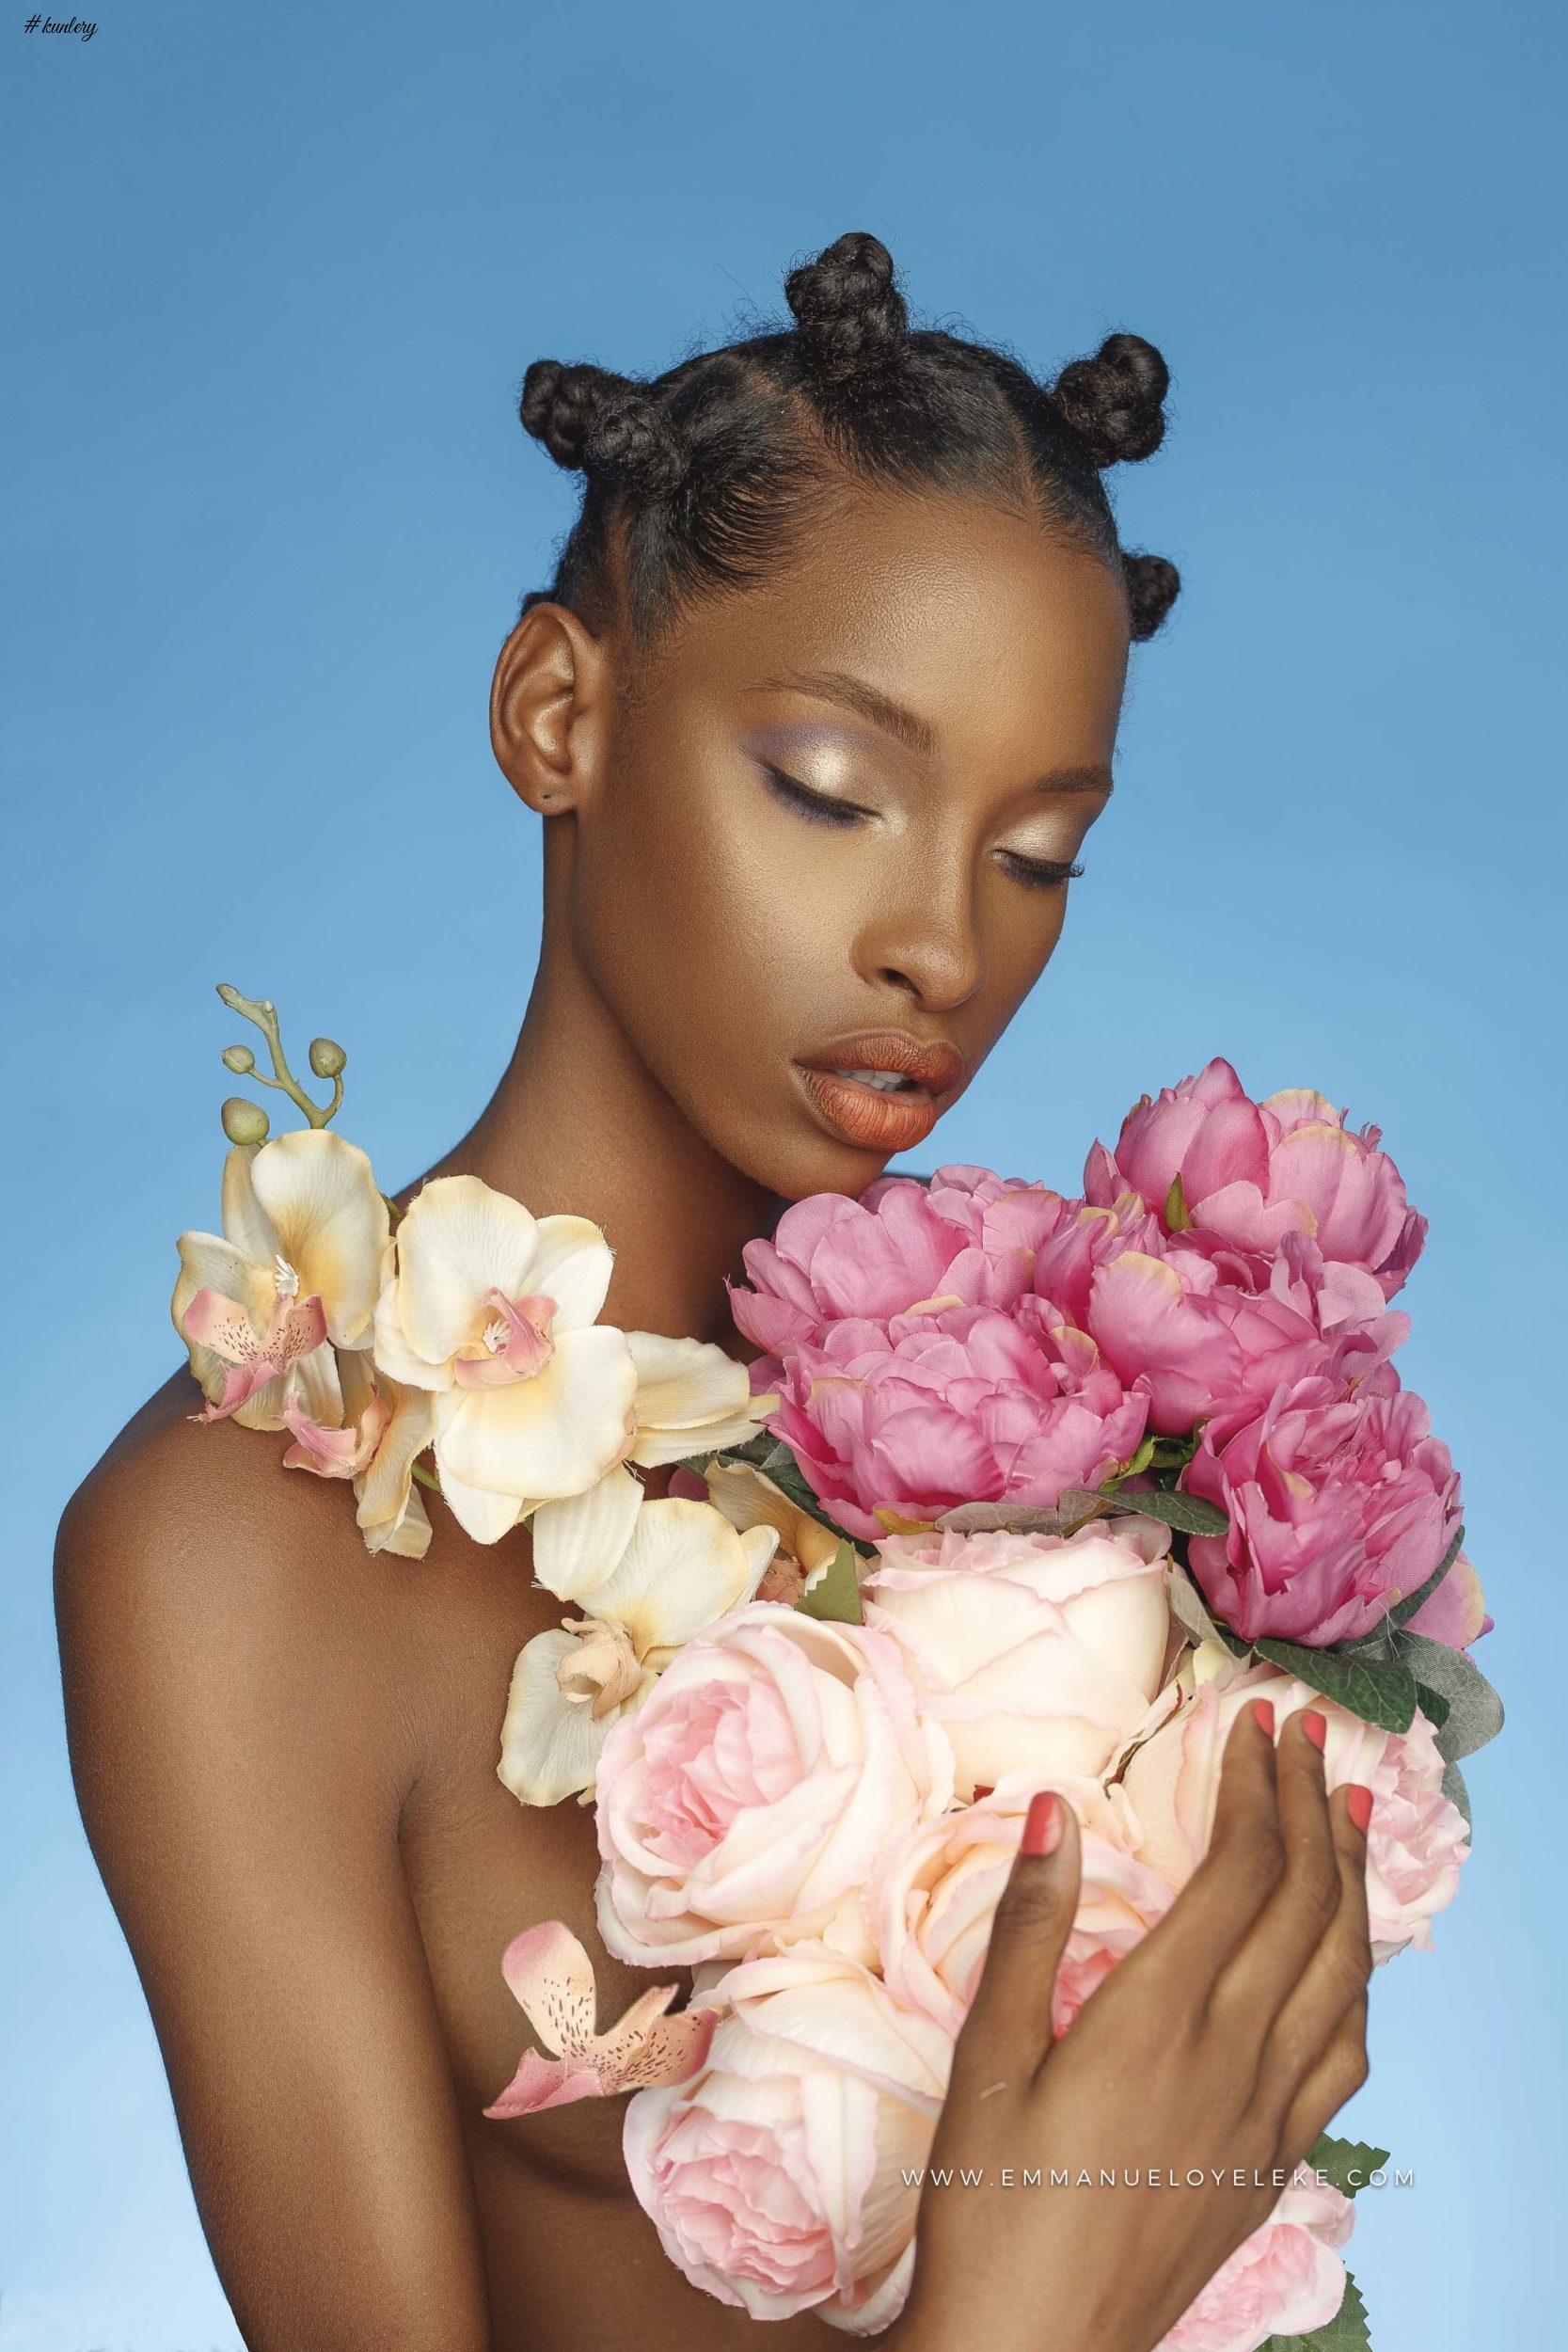 Emmanuel Oyeleke’s Blooming Beauty Shoot Is Everything You Need To See